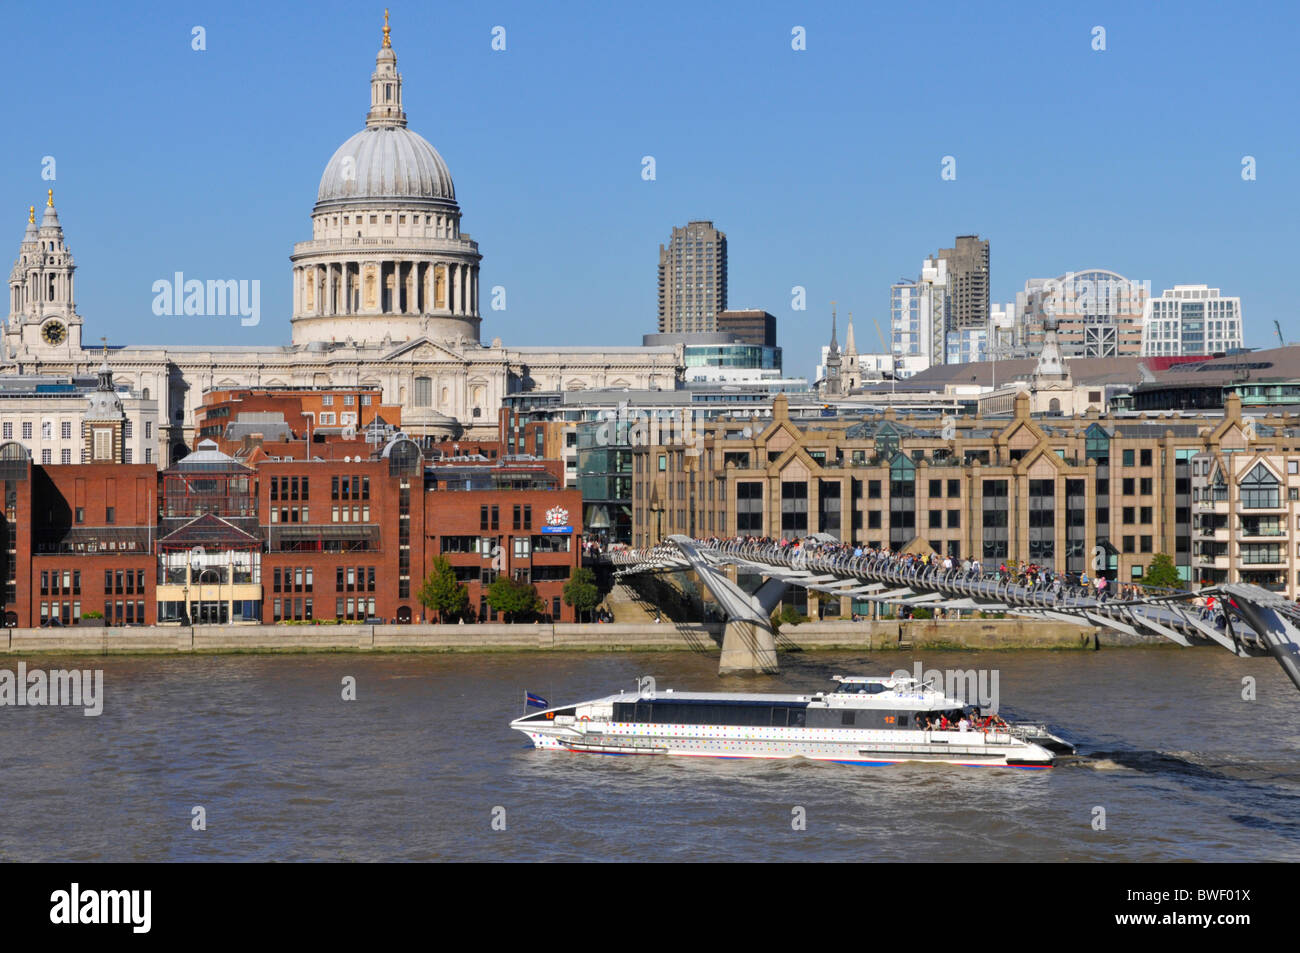 River Thames clipper boat with no advertising passing St Pauls Cathedral and the Millennium Bridge Stock Photo